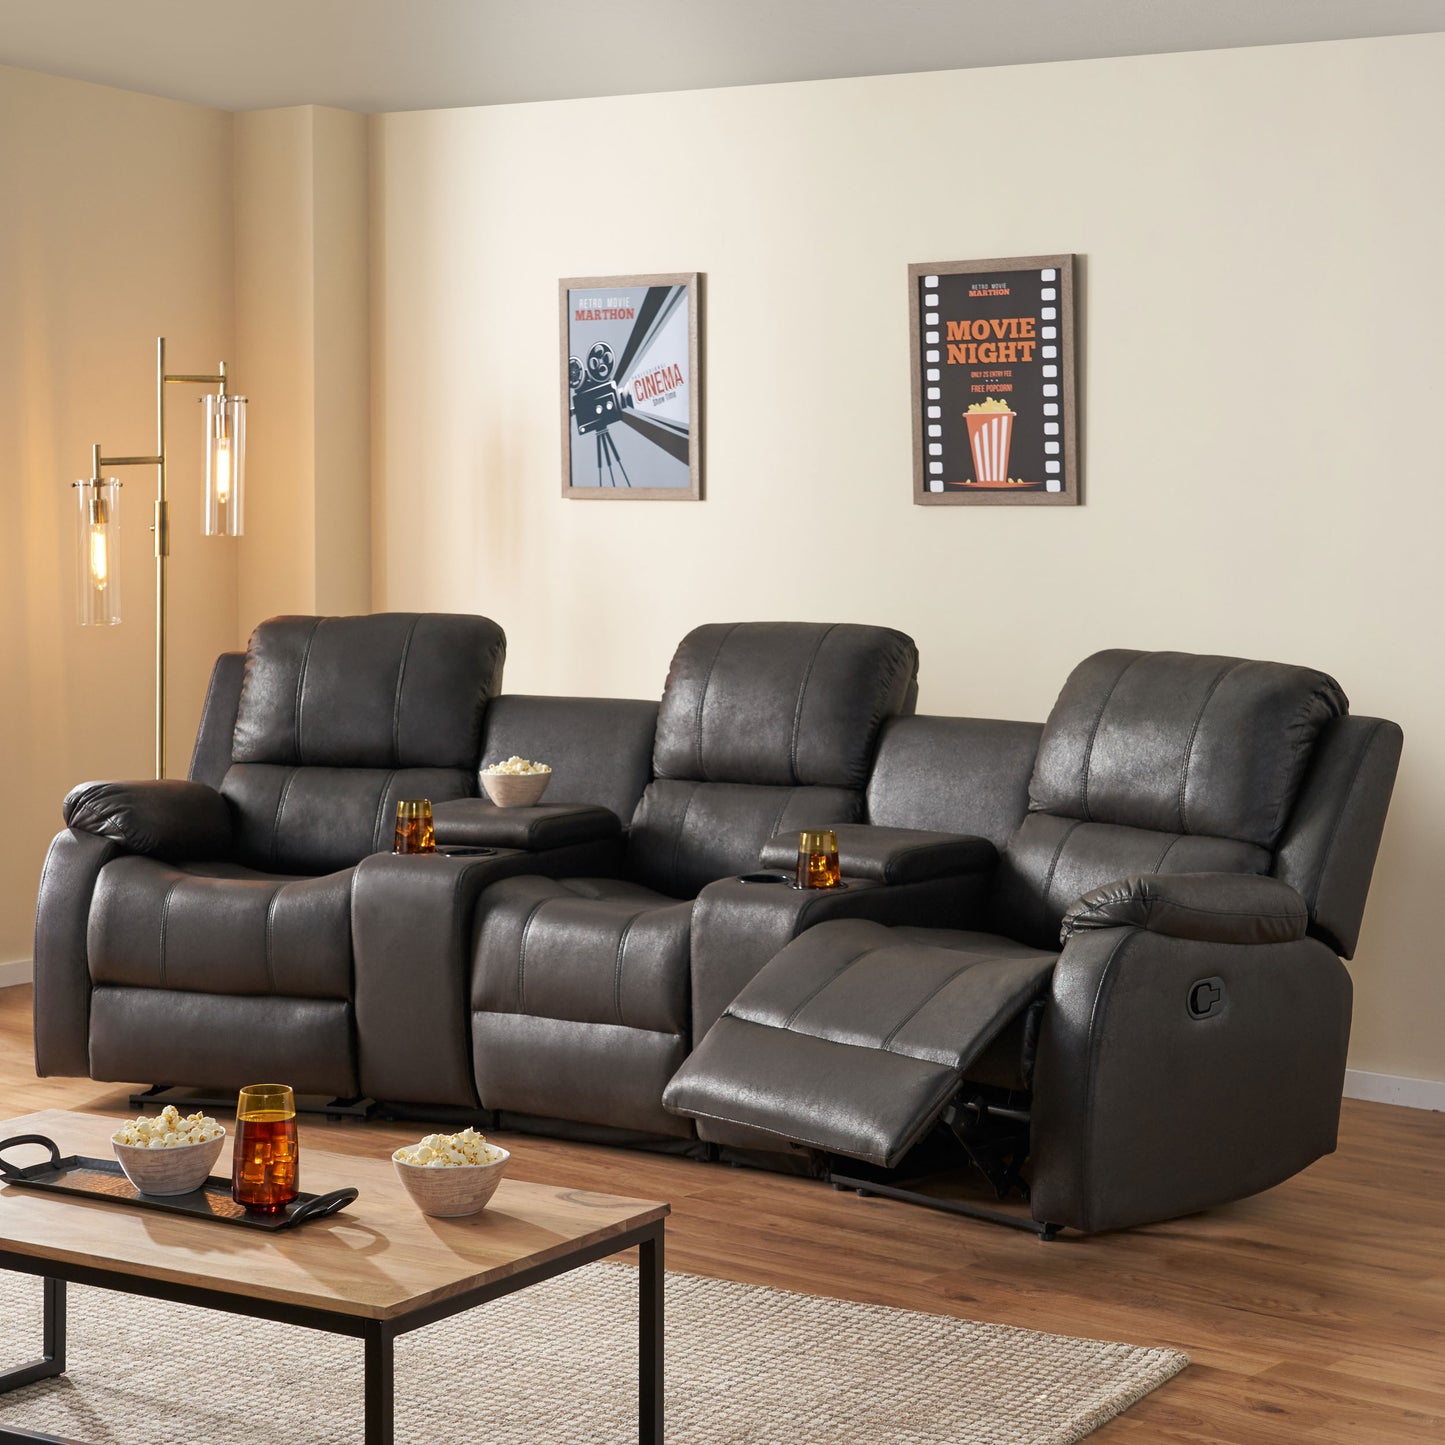 Lunsford Contemporary Upholstered Theater Seating Reclining Sofa